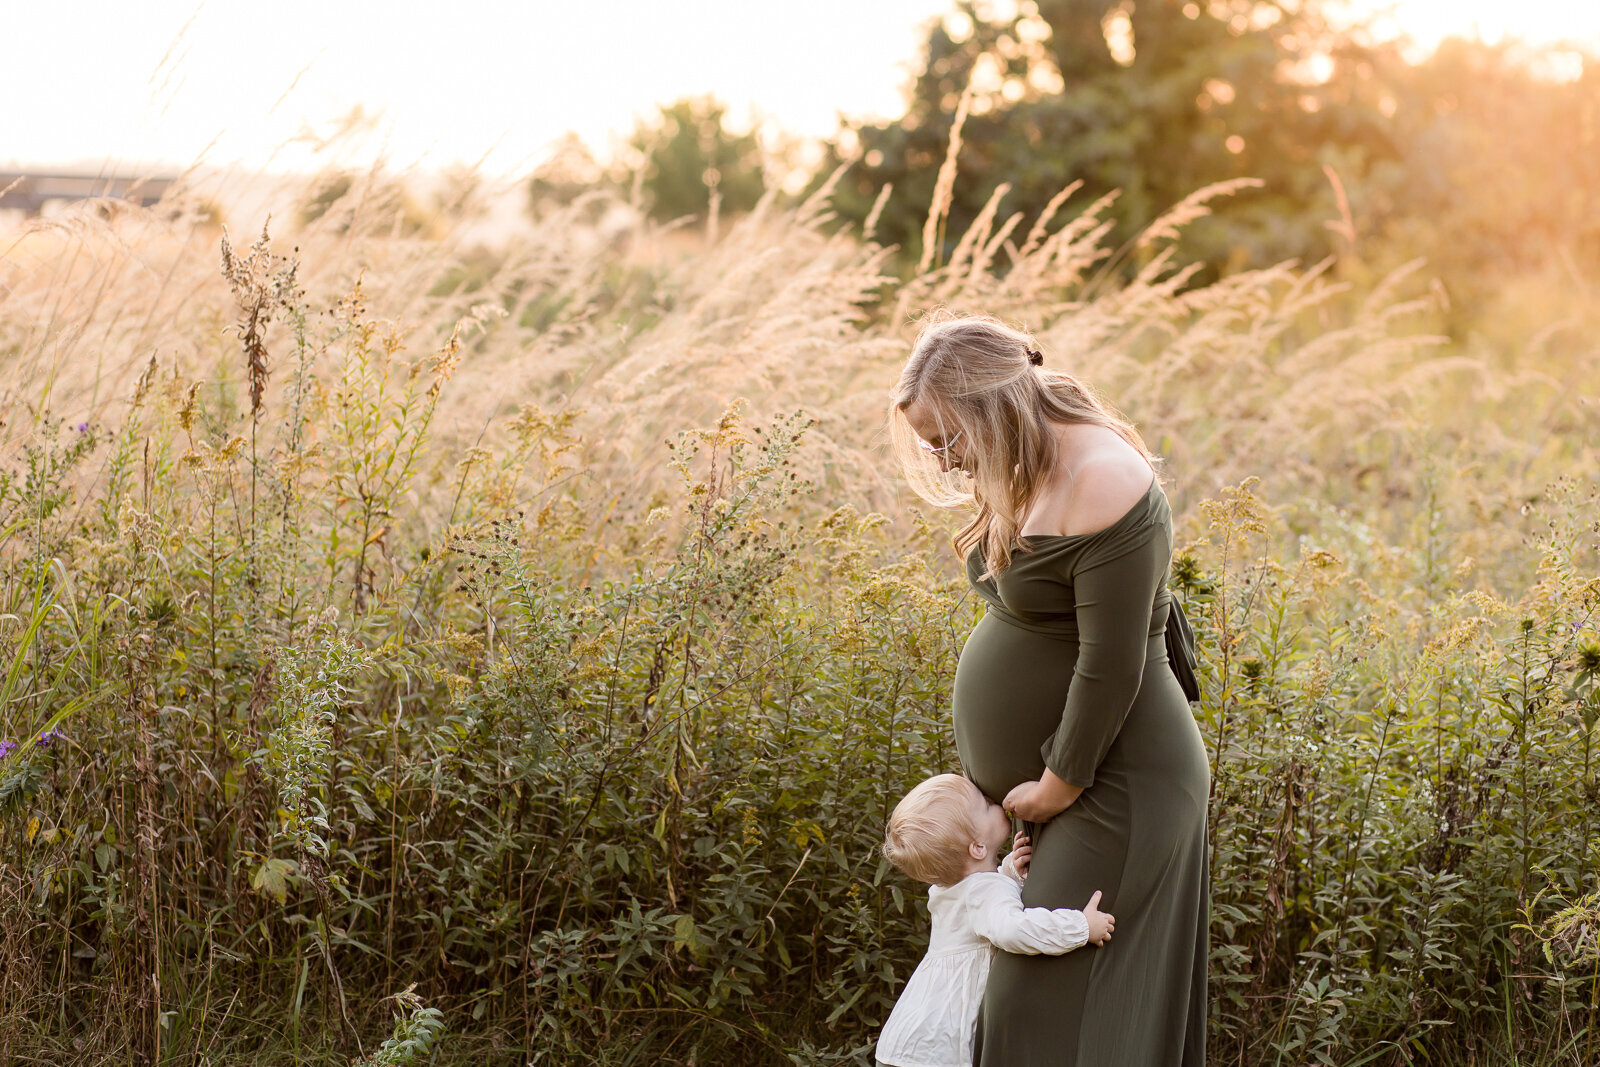 outdoor_maternity_photography_session_Frankfort_KY_photographer_goldenhour-4